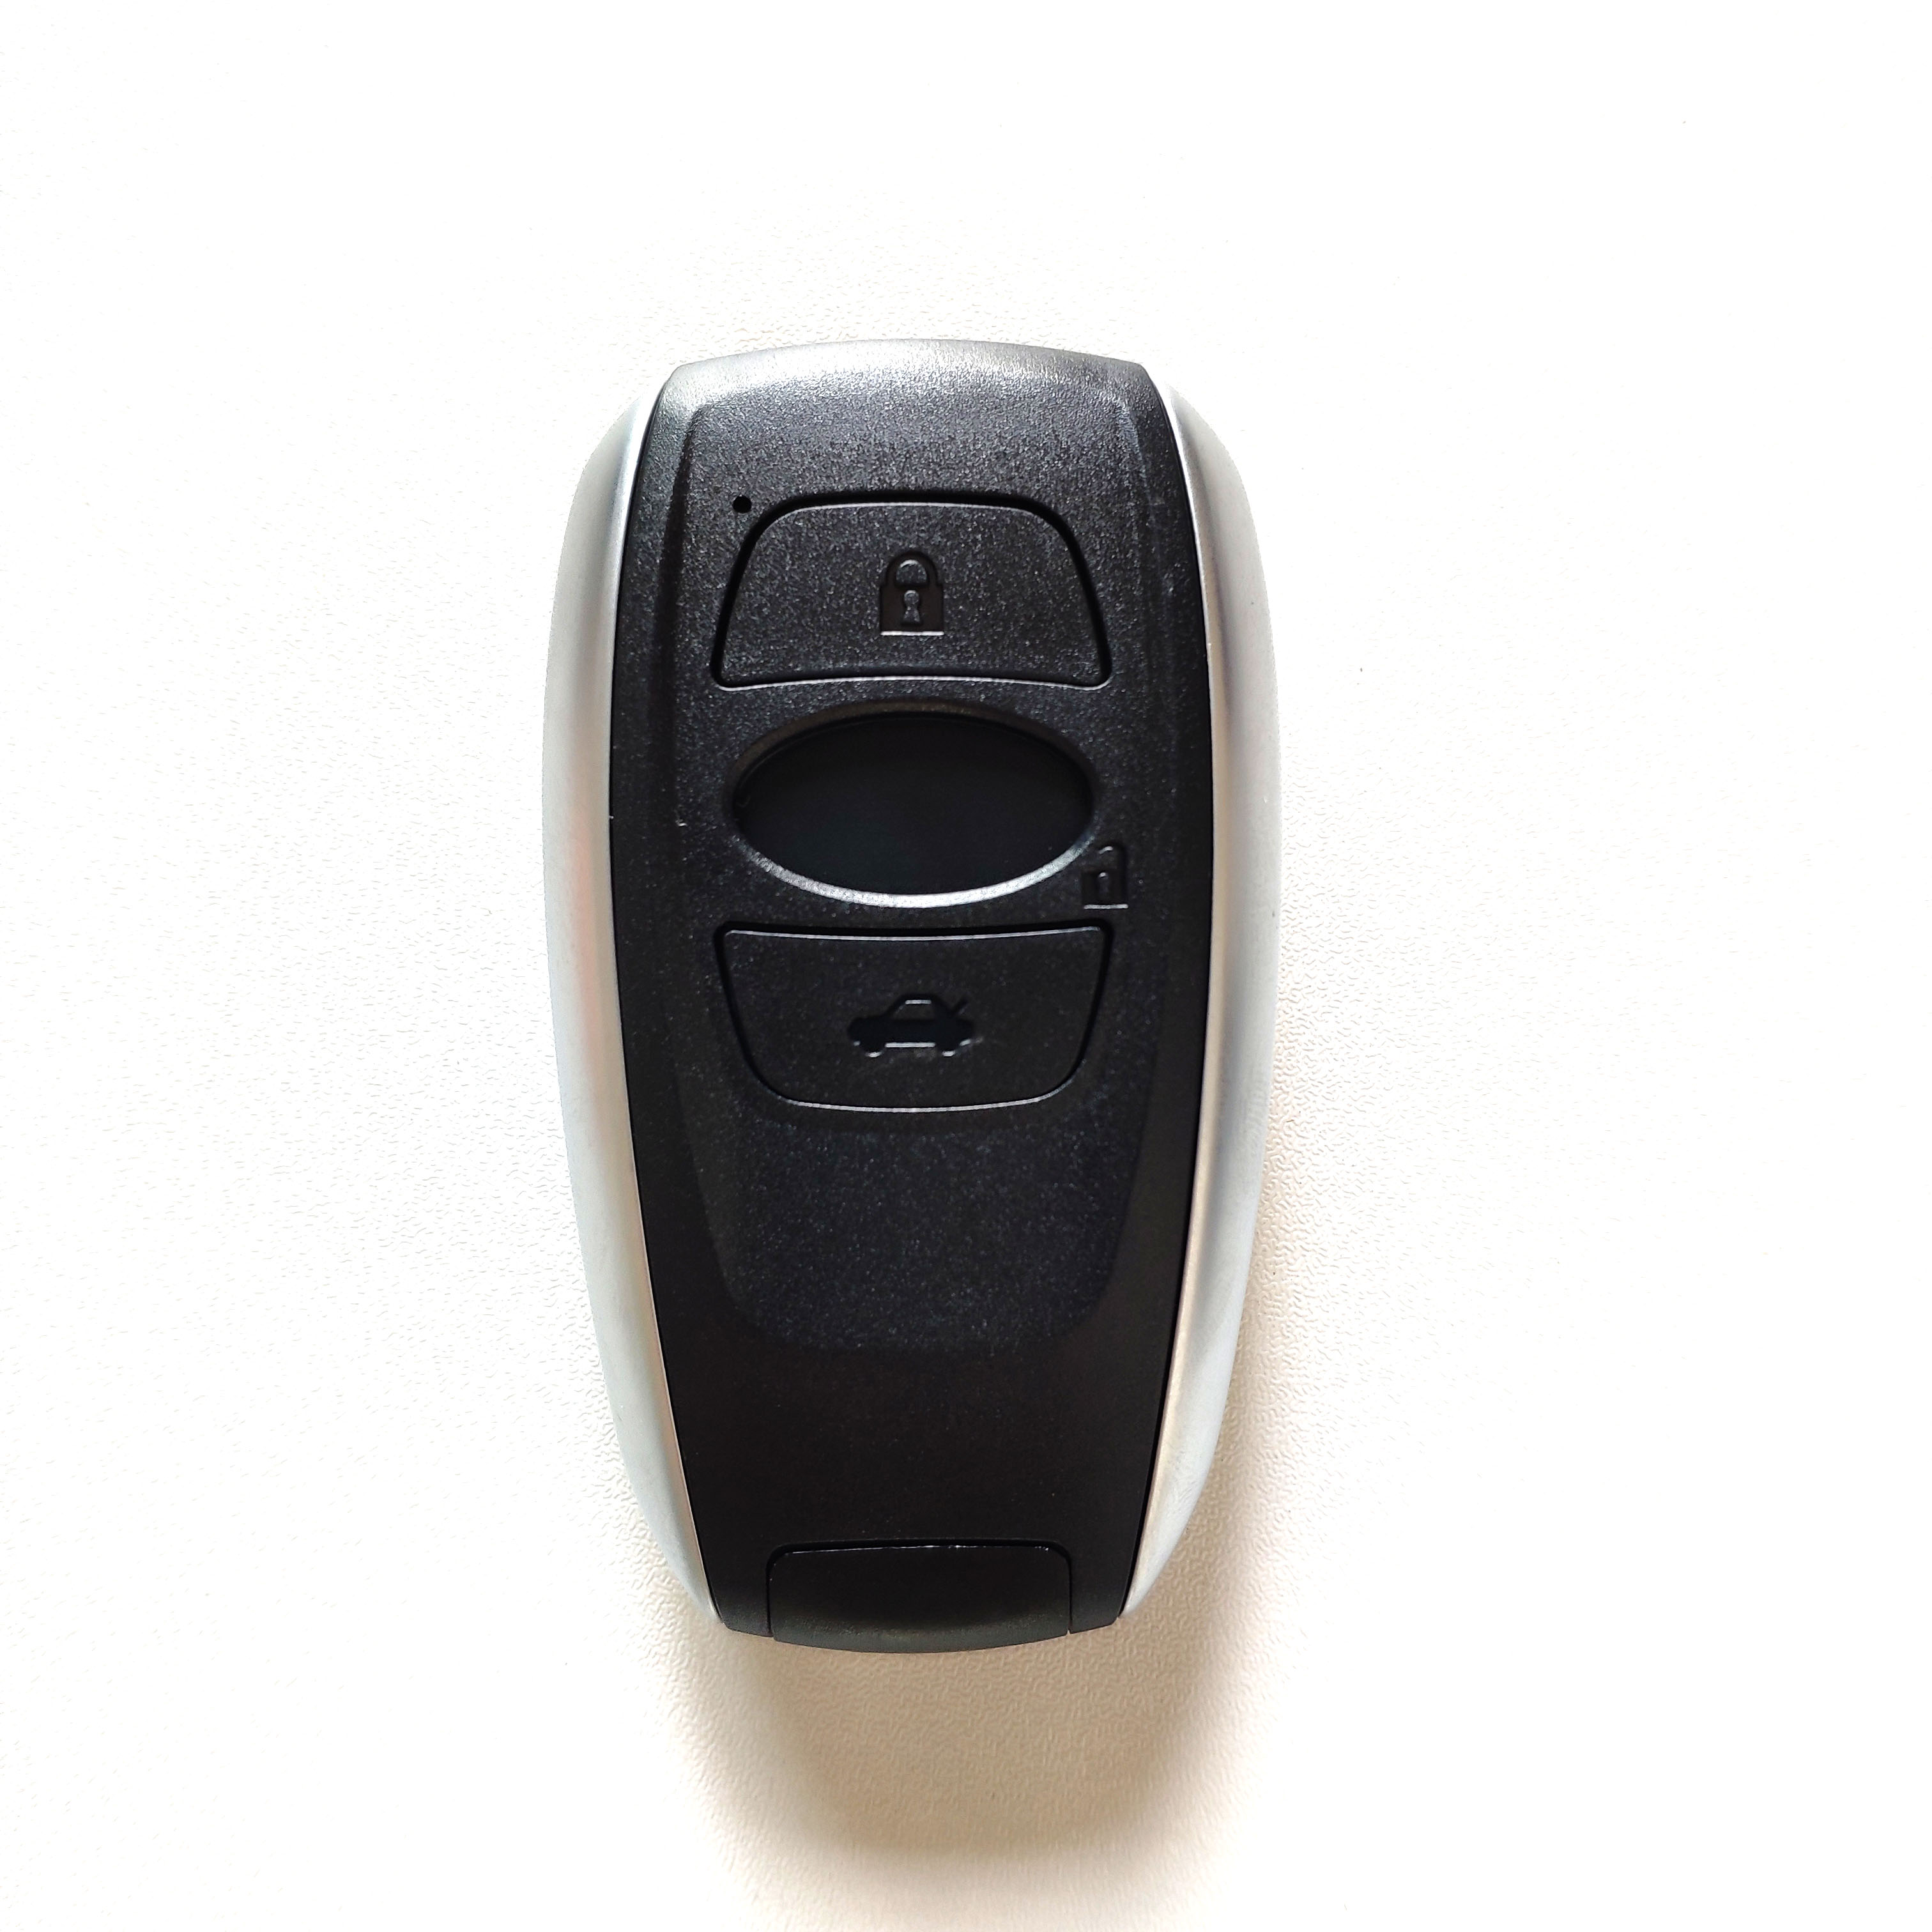 434 MHz 2 Buttons Smart Key for Subaru